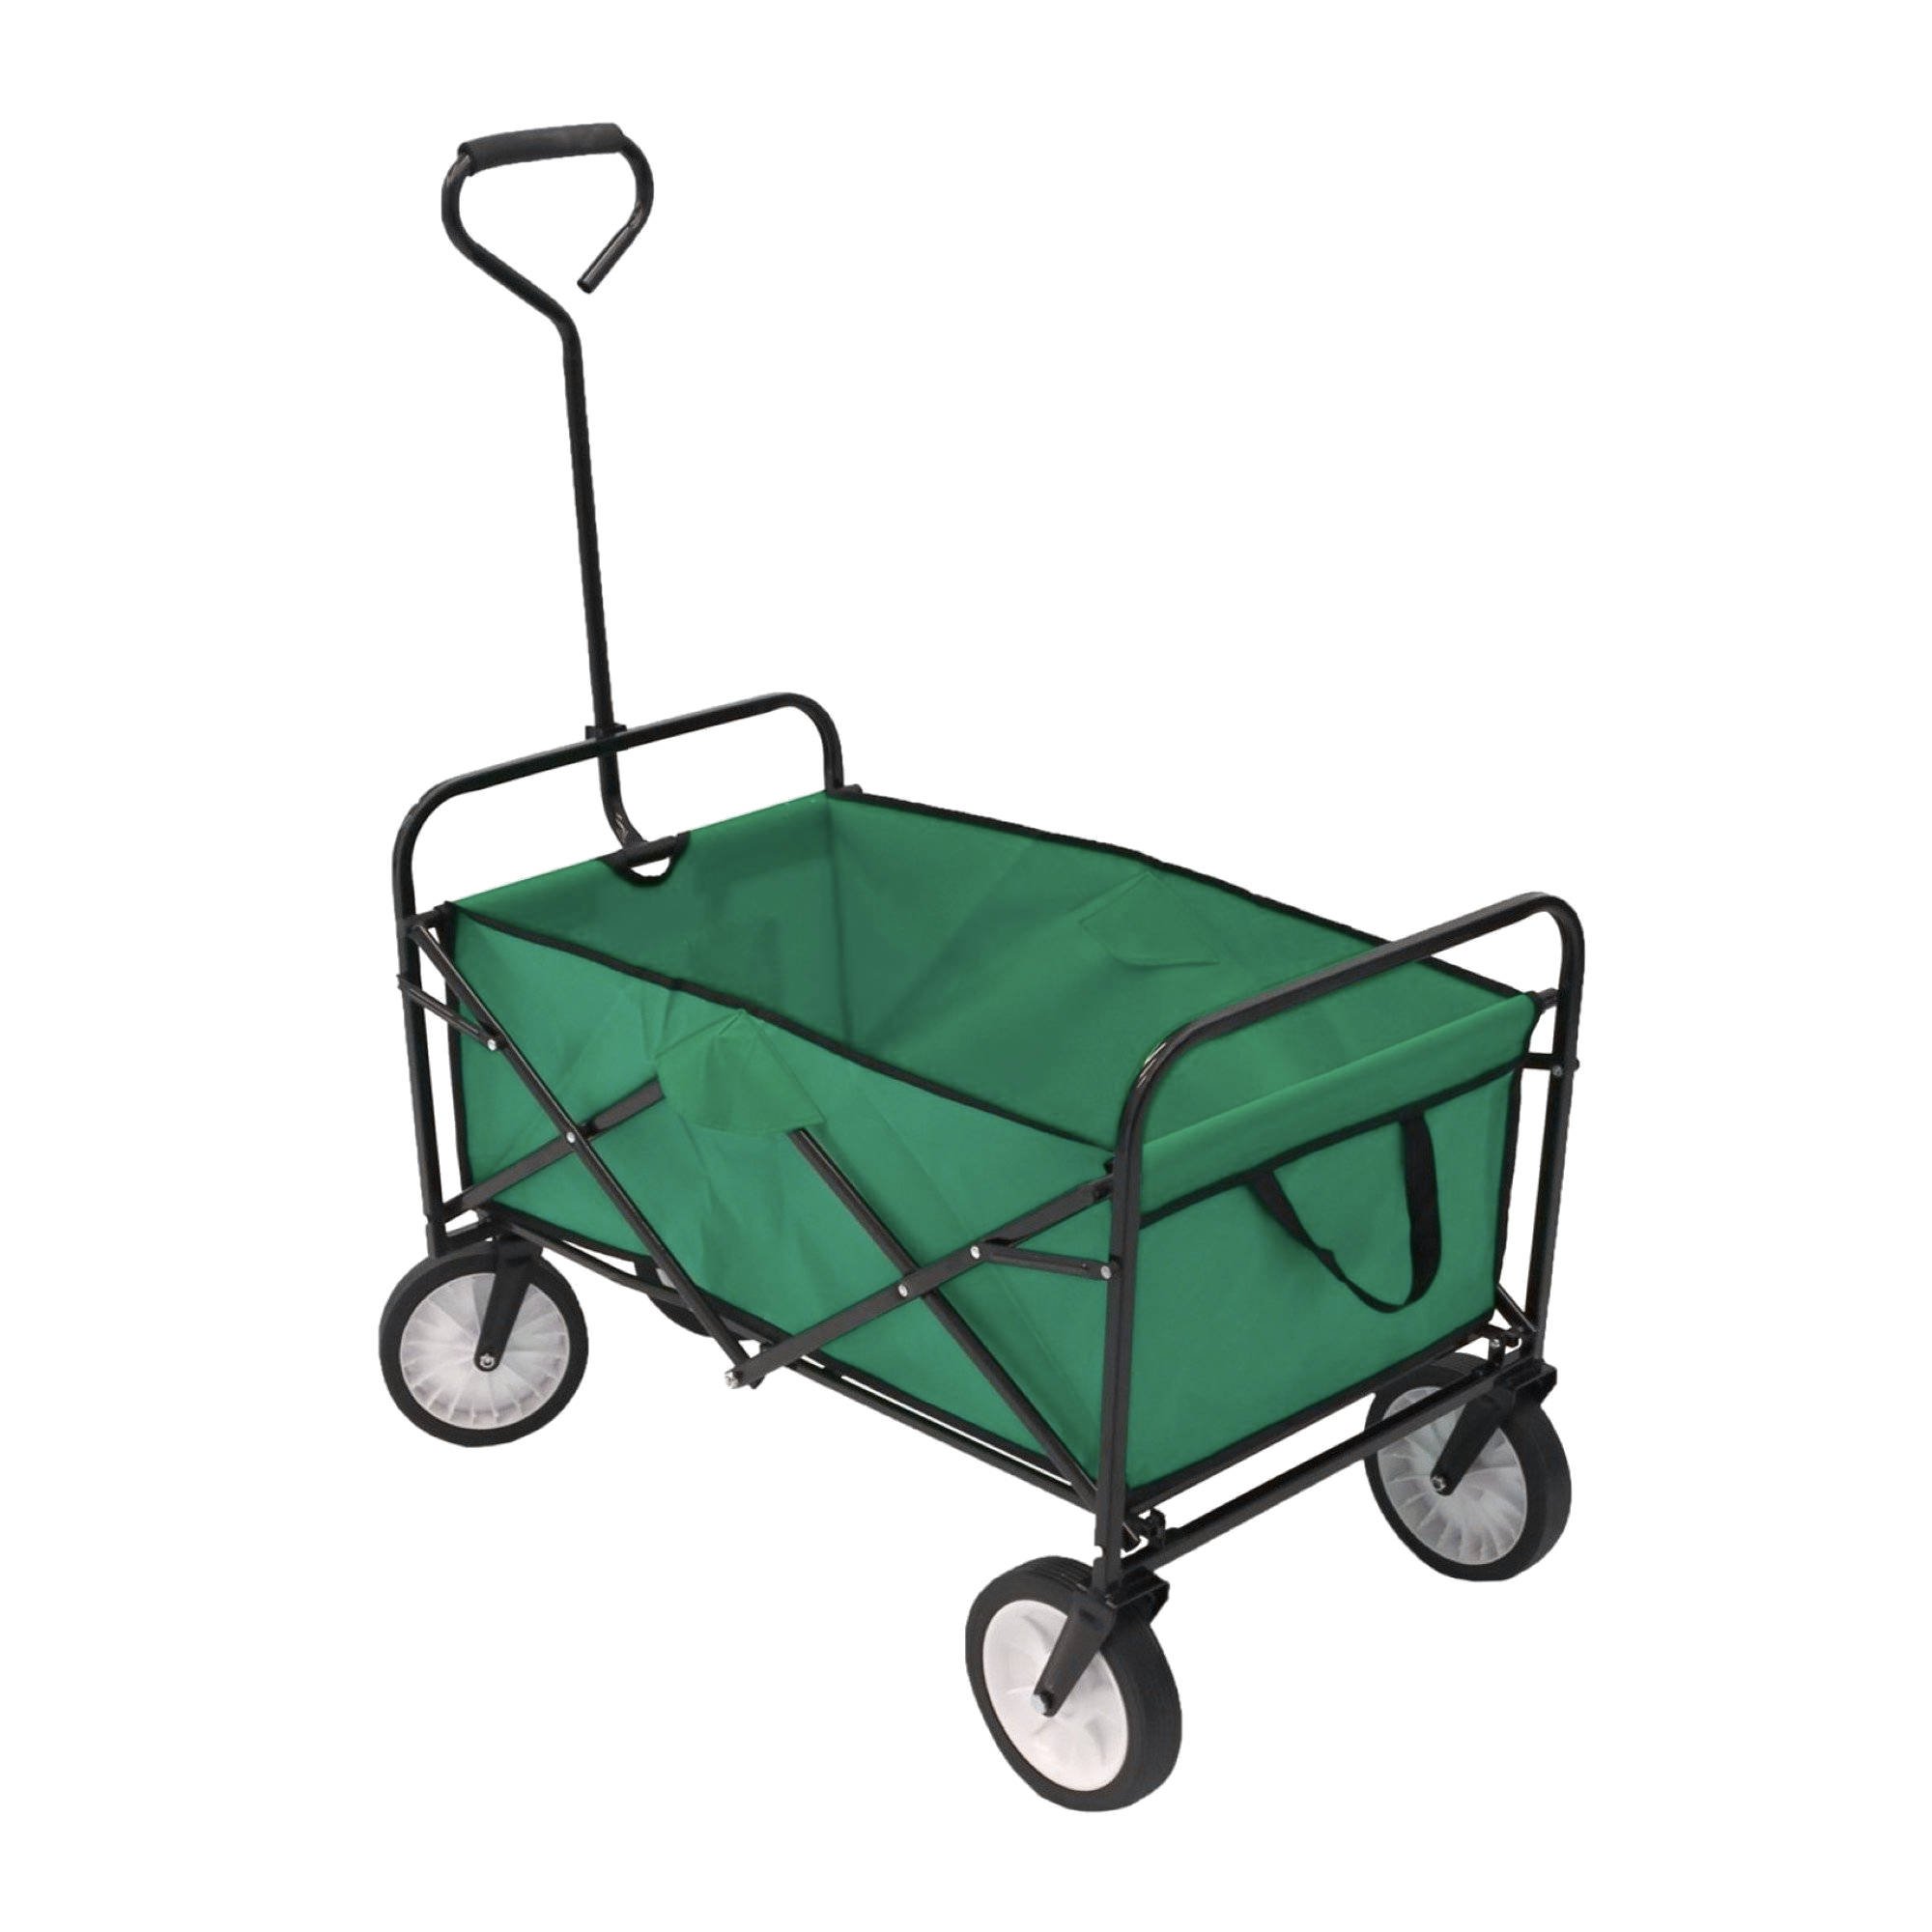 Green Heavy Duty Foldable Garden Trolley Cart Wagon Truck - Click Image to Close